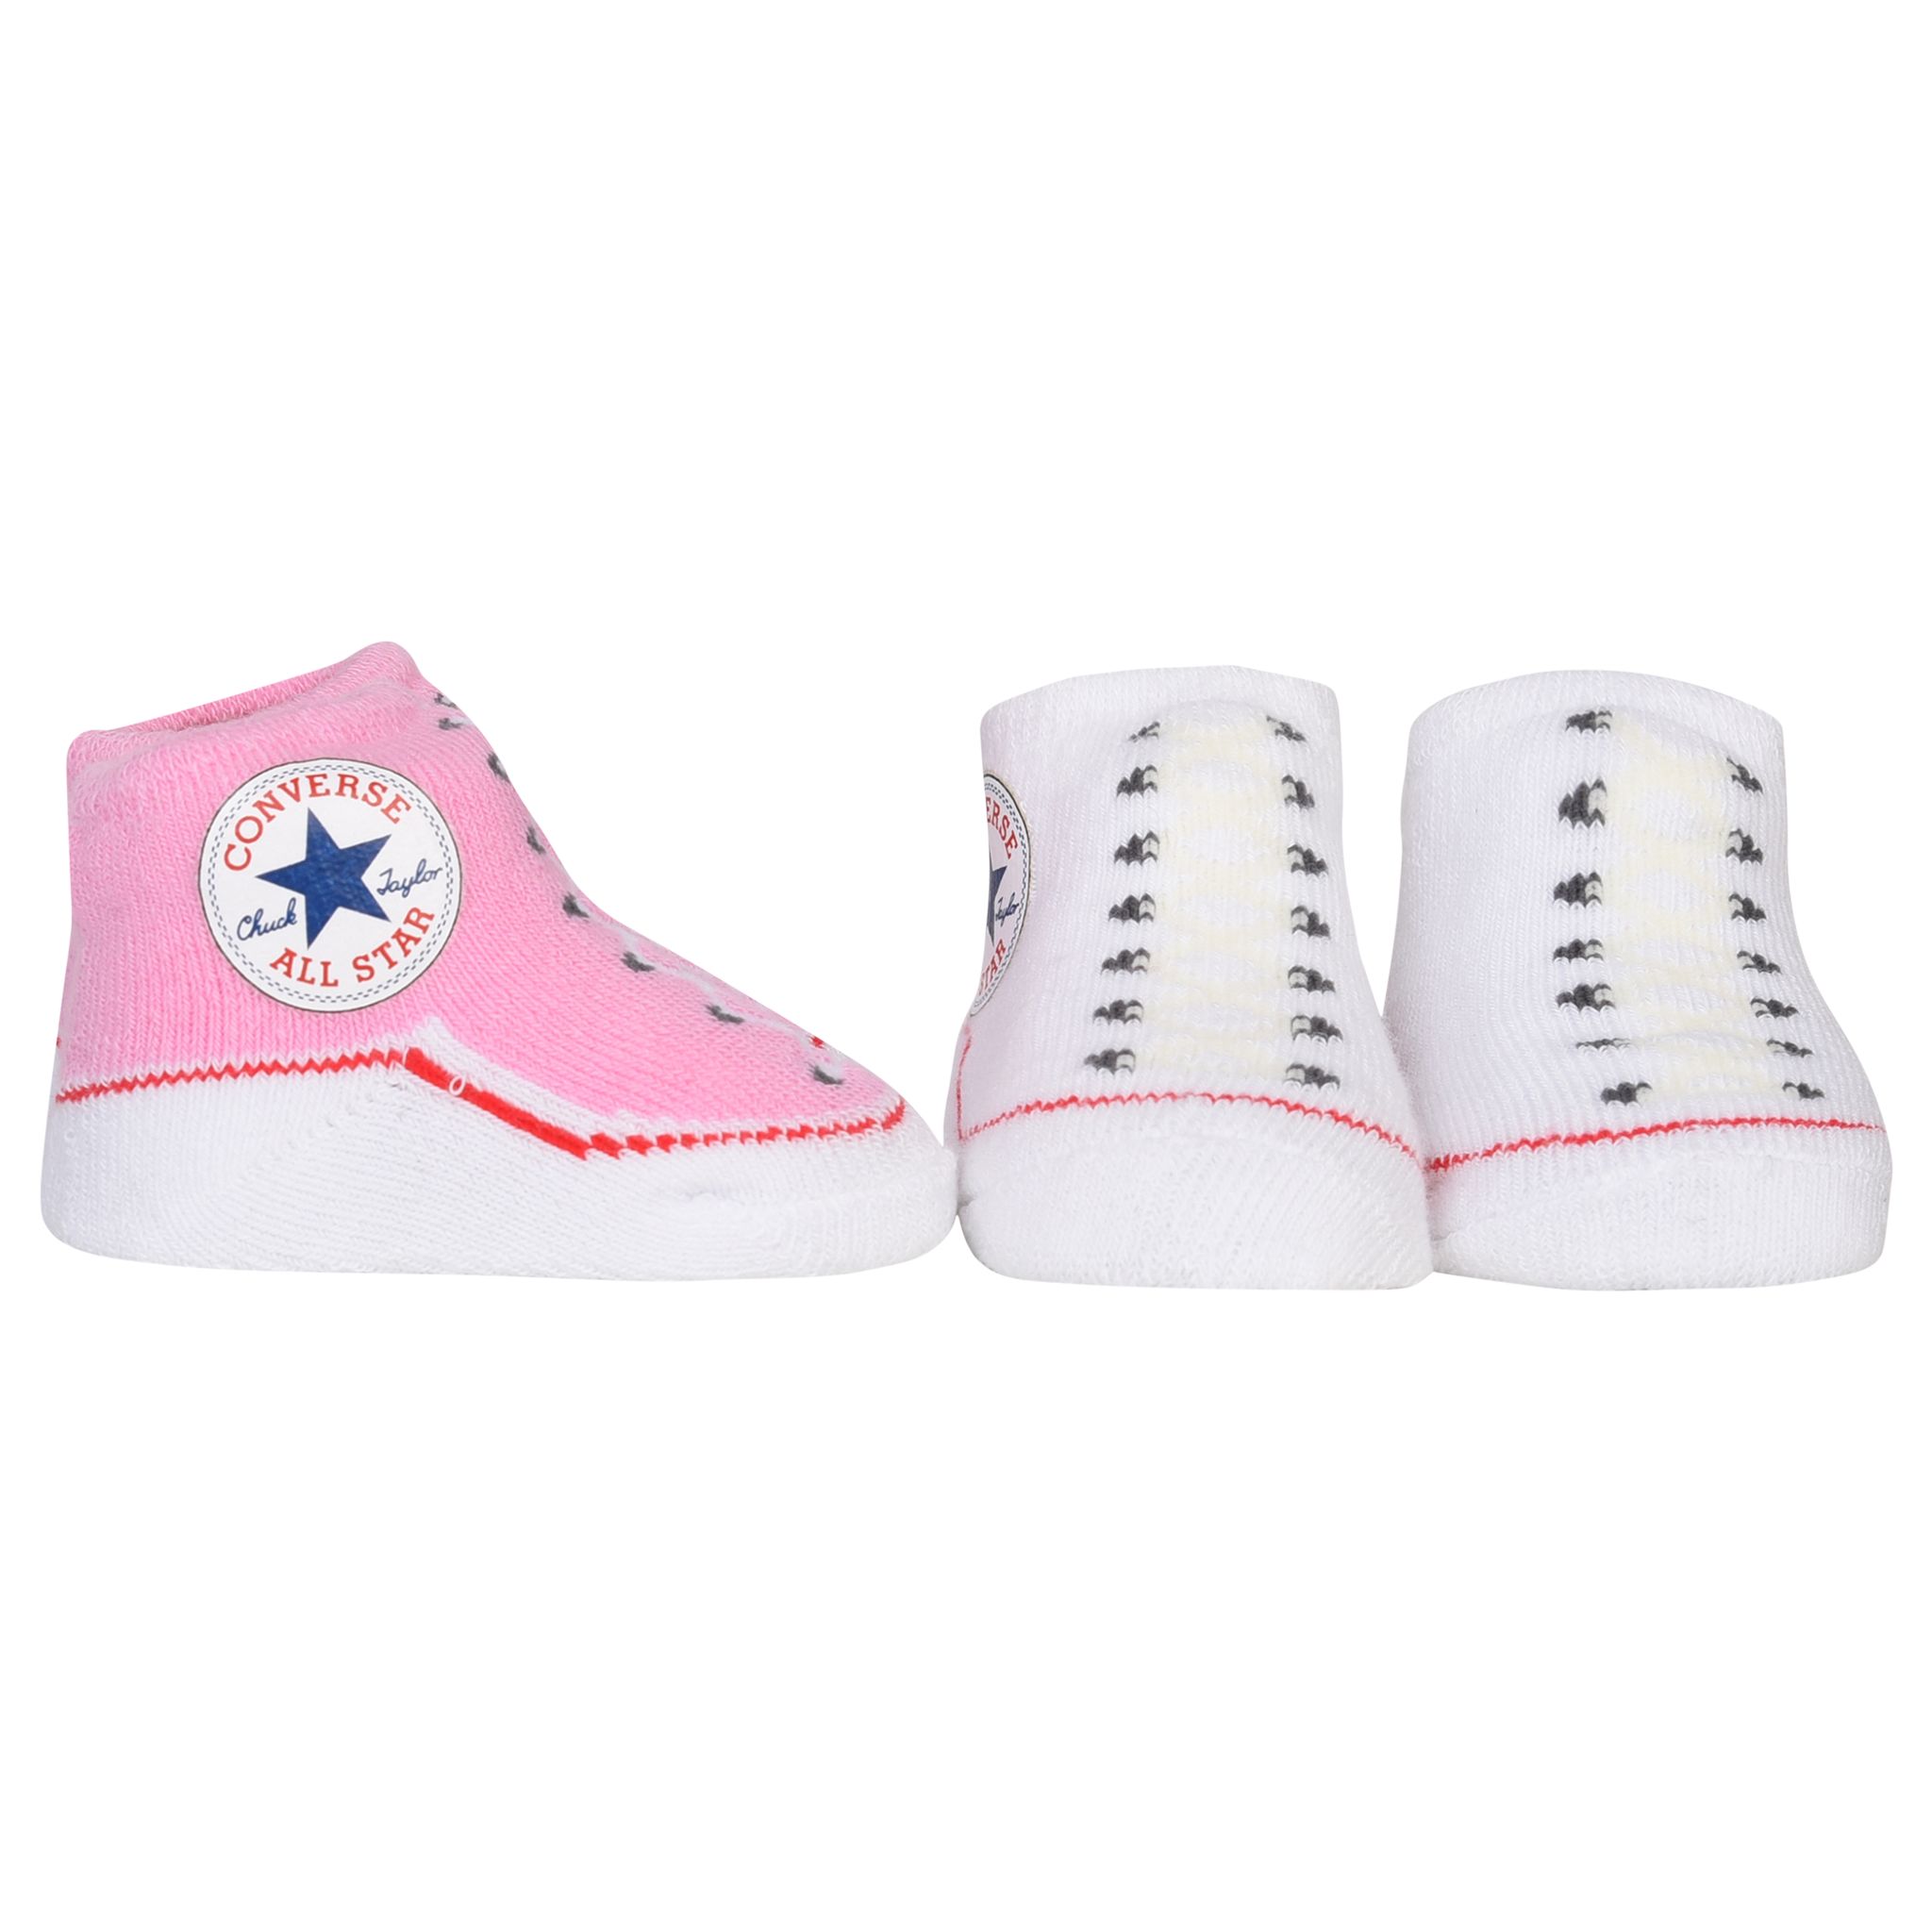 Converse Baby Booties, Pack of 2, Pink 